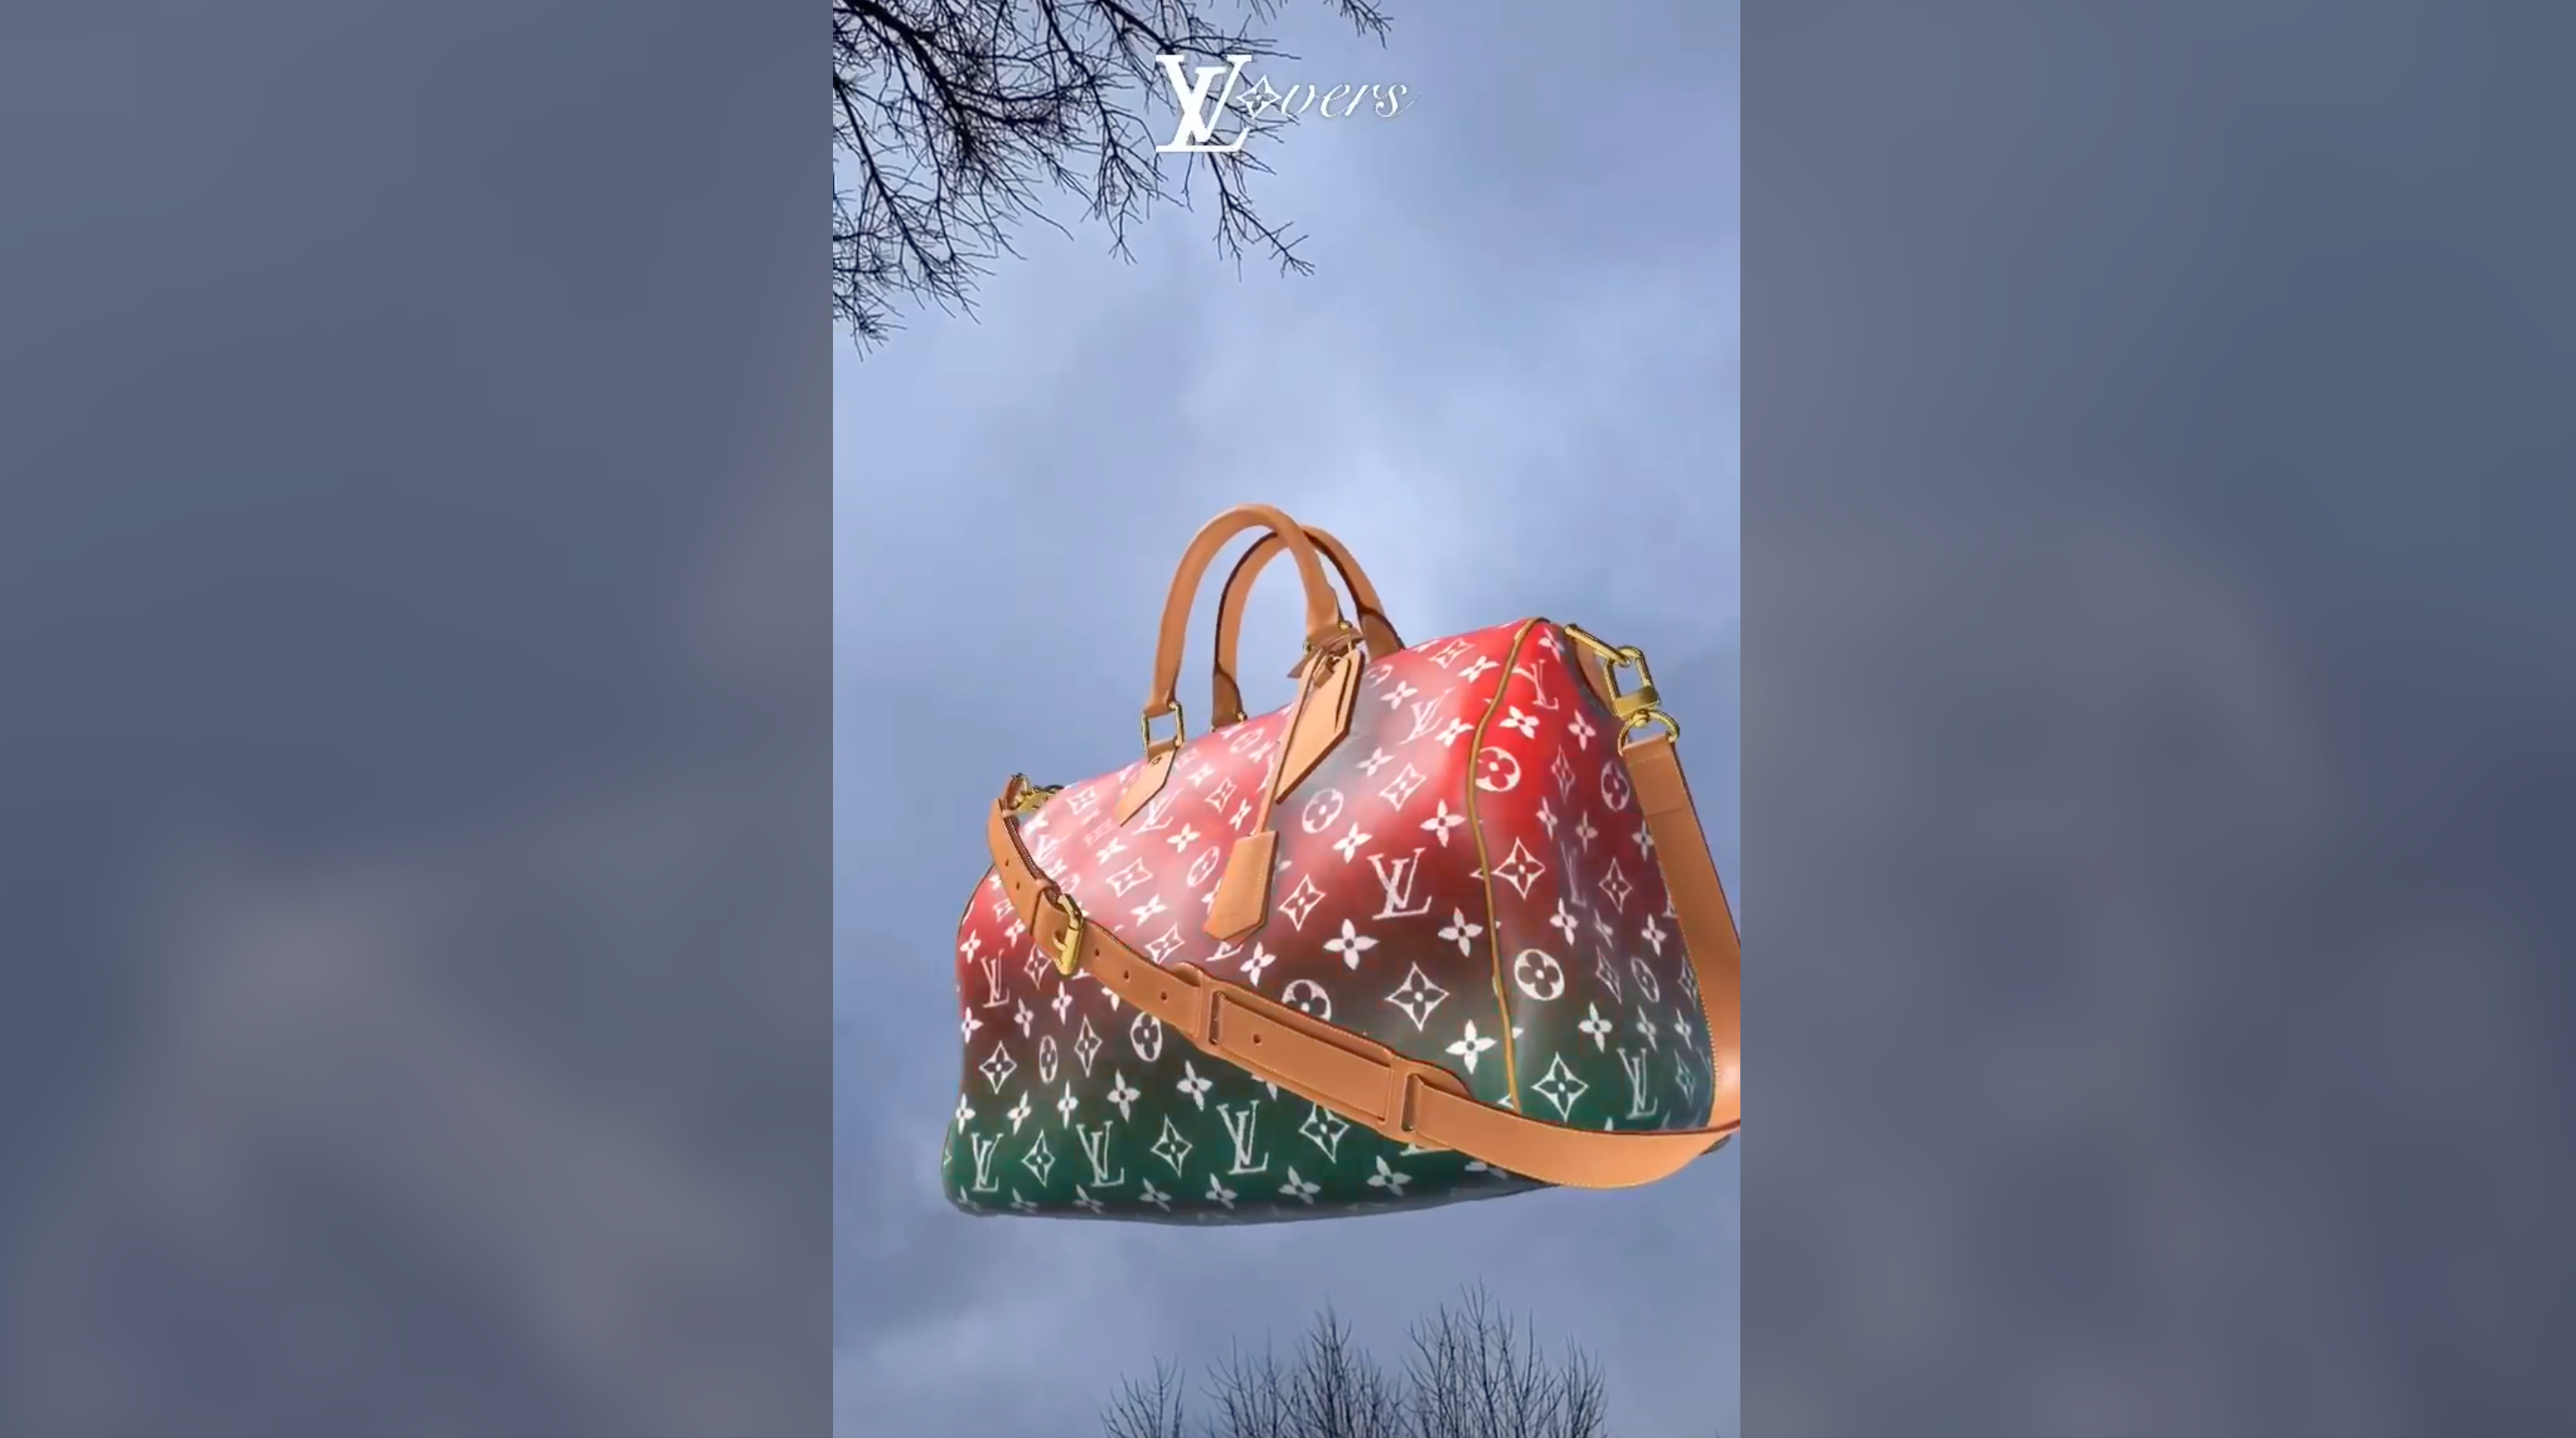 Louis Vuitton has released a special Snap filter to promote its Speedy bag collection. Photo: Helen Papagiannis via LinkedIn